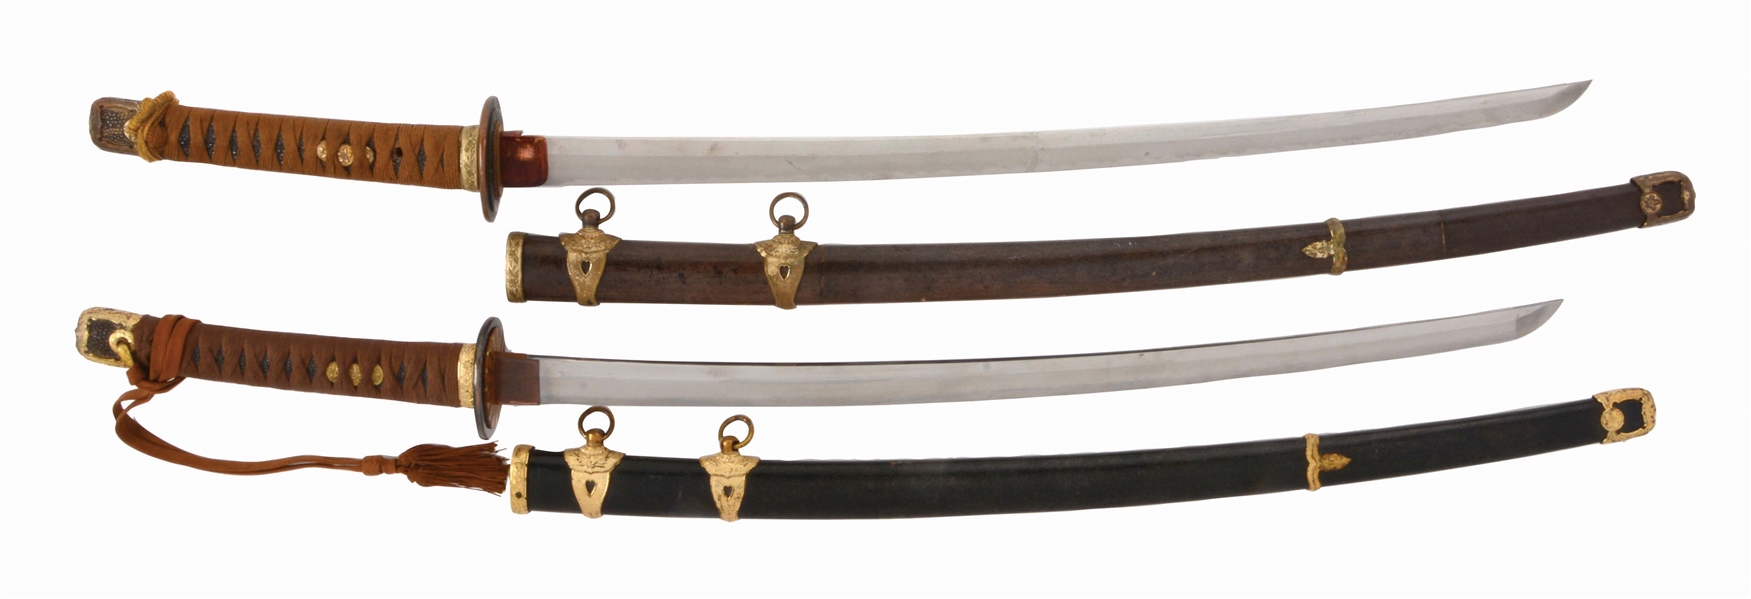 LOT OF TWO: FINE AND VERY ATTRACTIVE JAPANESE WORLD WAR II NAVAL OFFICERS SAMURAI SWORDS.